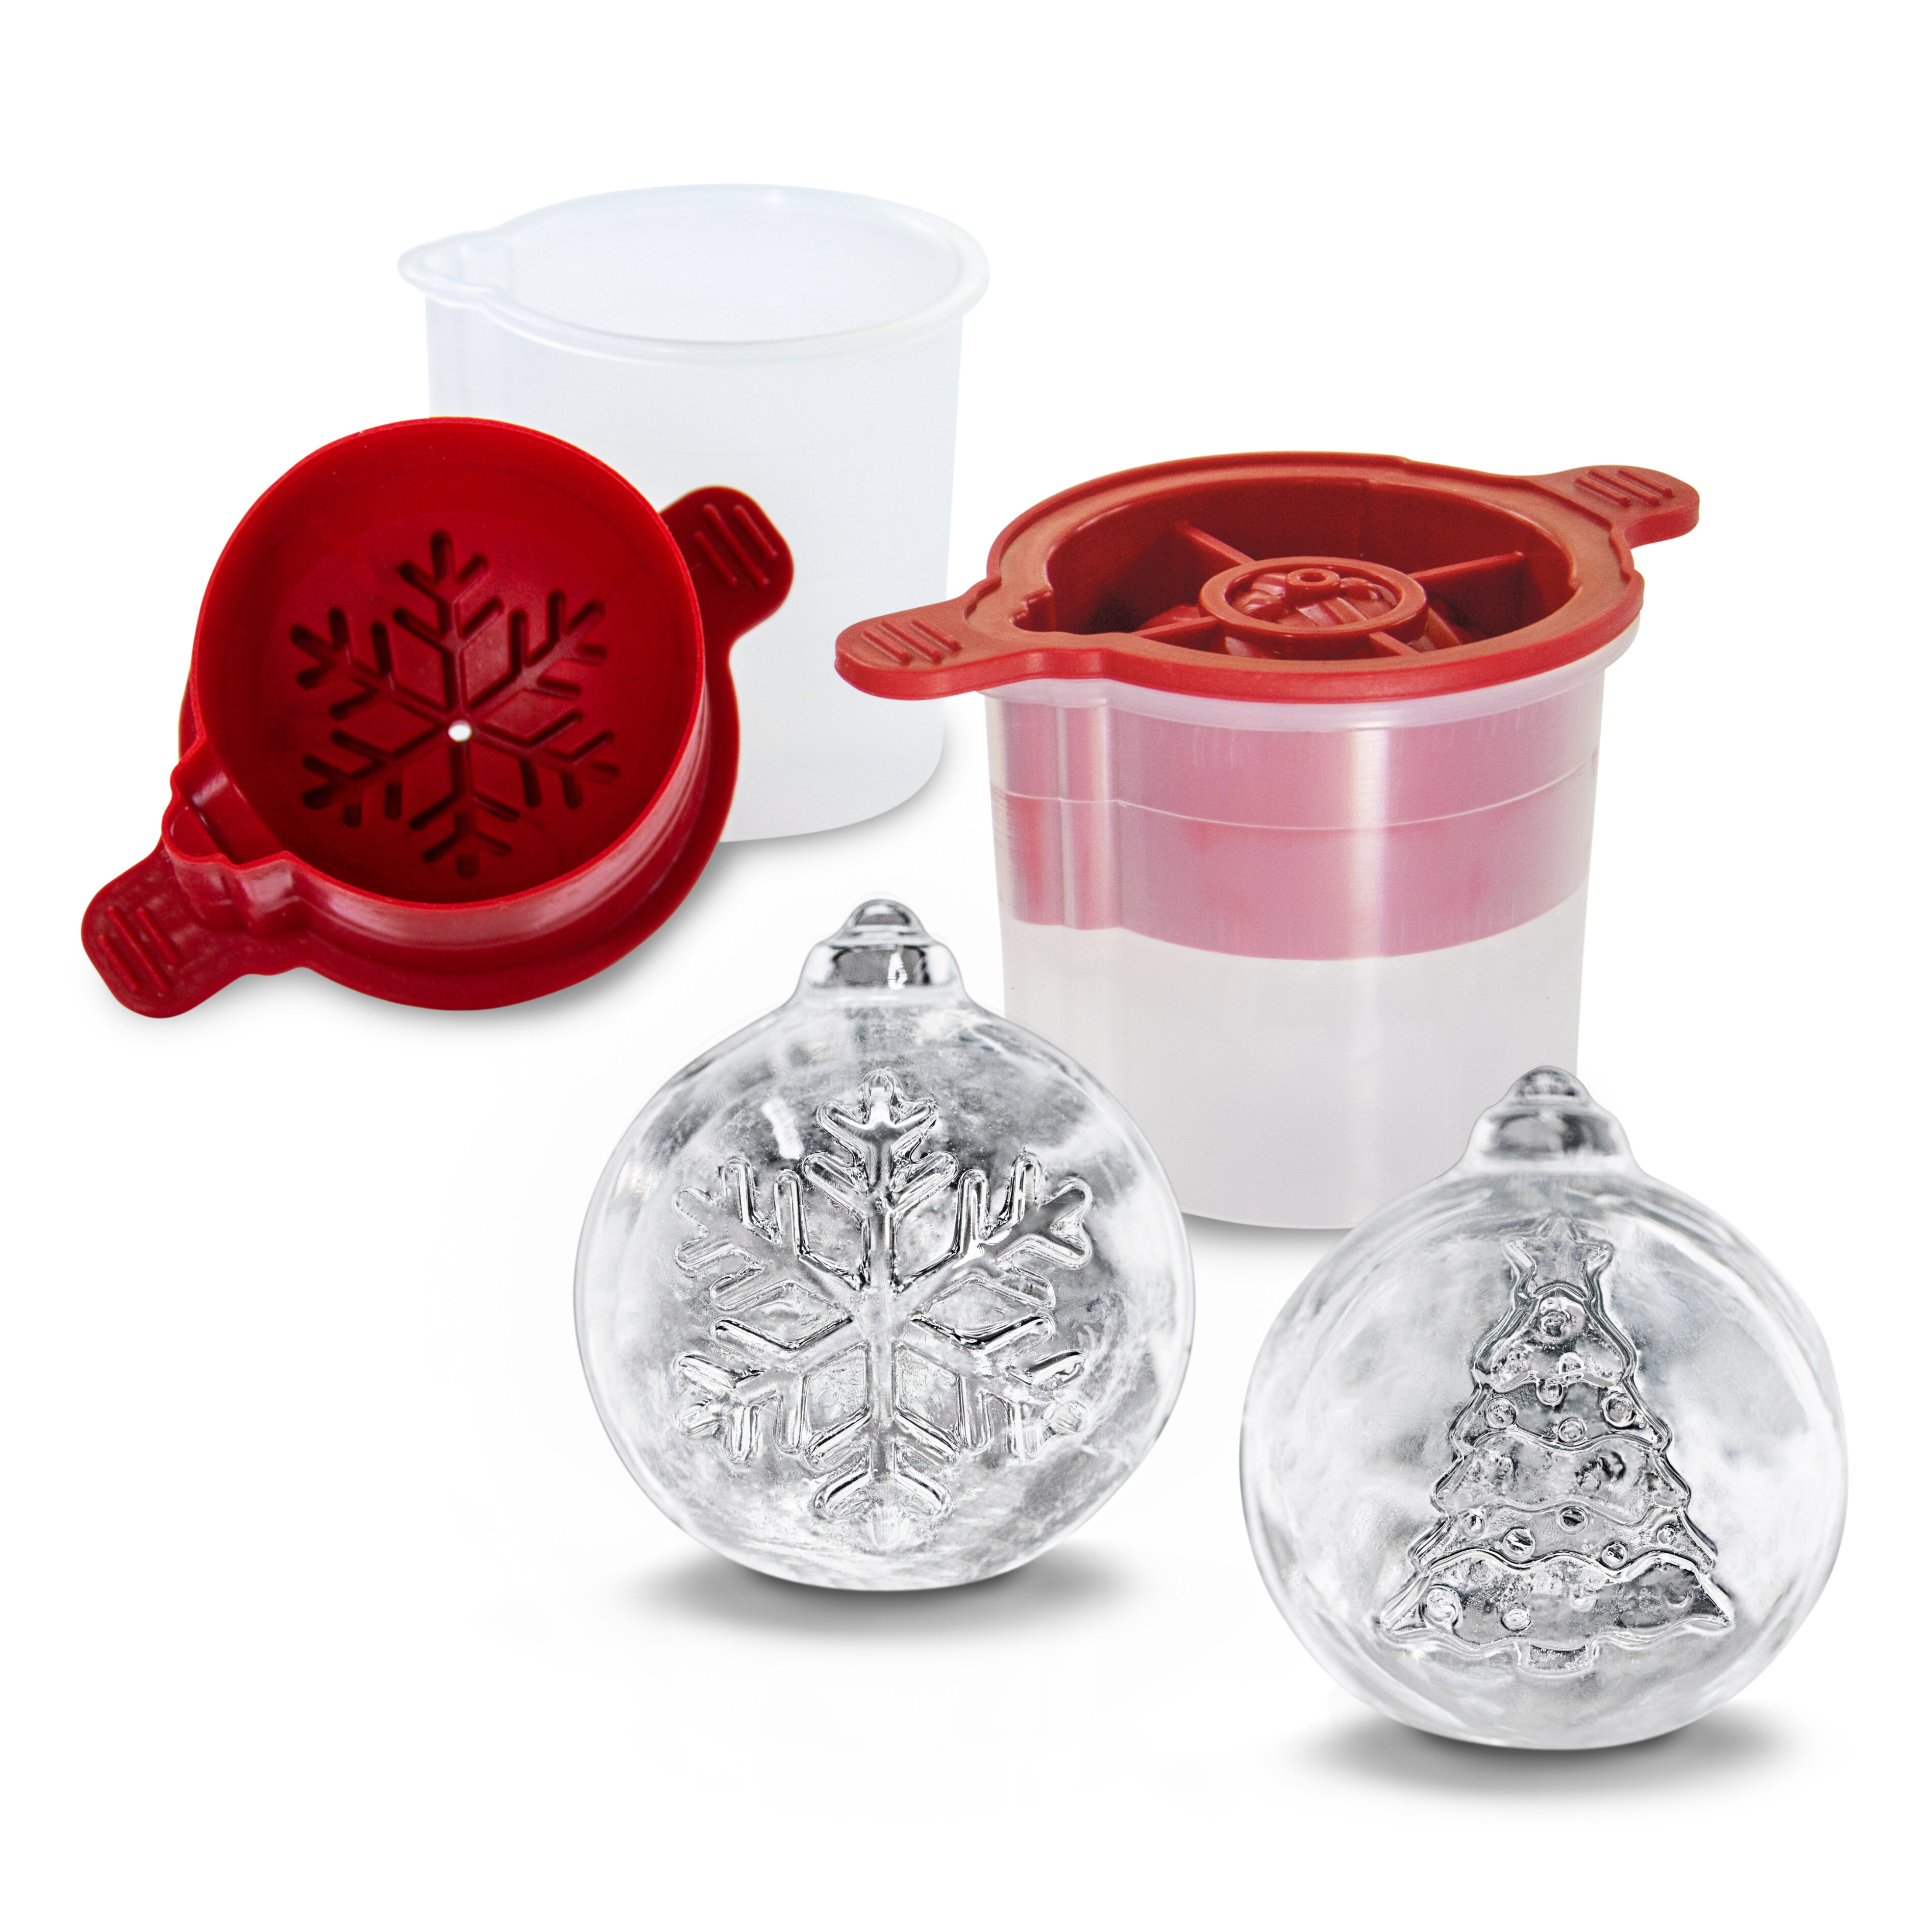 Tovolo Tree and Snow Flake Ornament Ice Cube Tray & Reviews